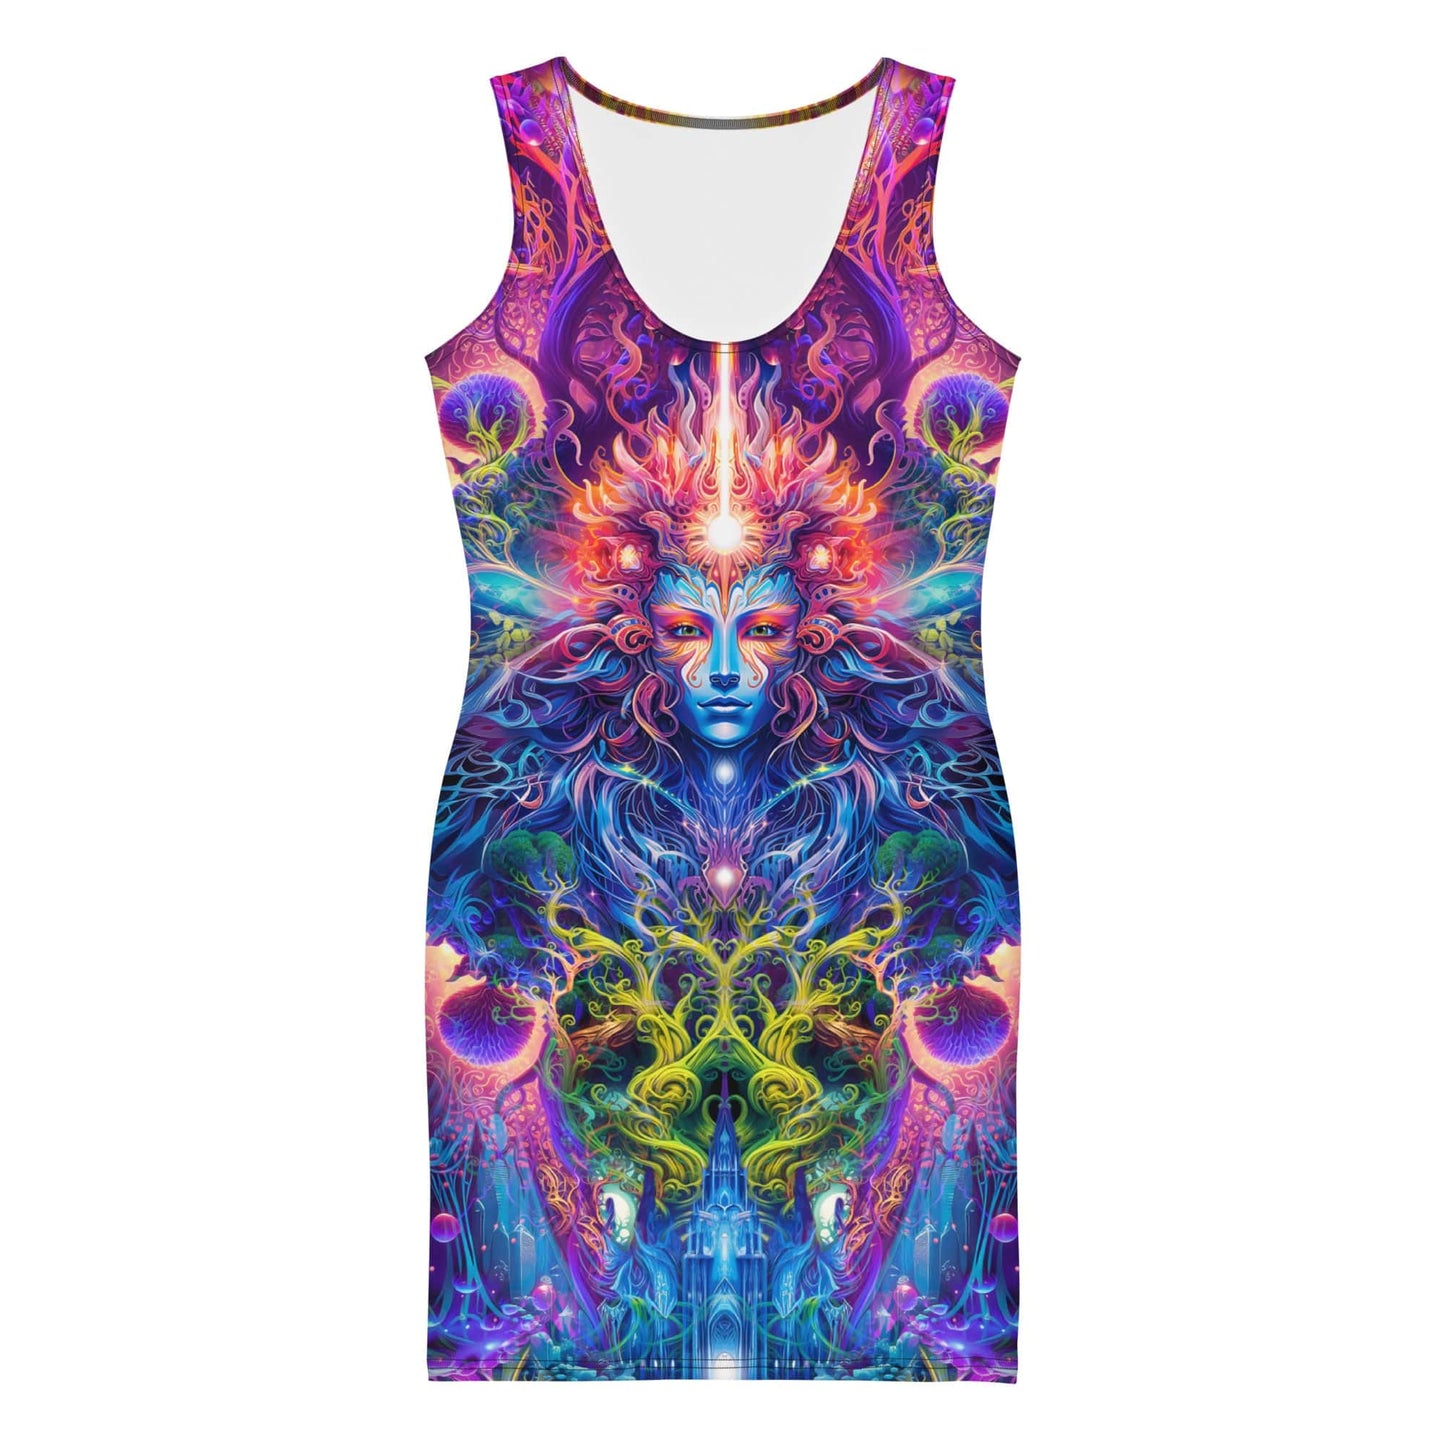 "The Sacred Vine" Bodycon FITTED DRESS